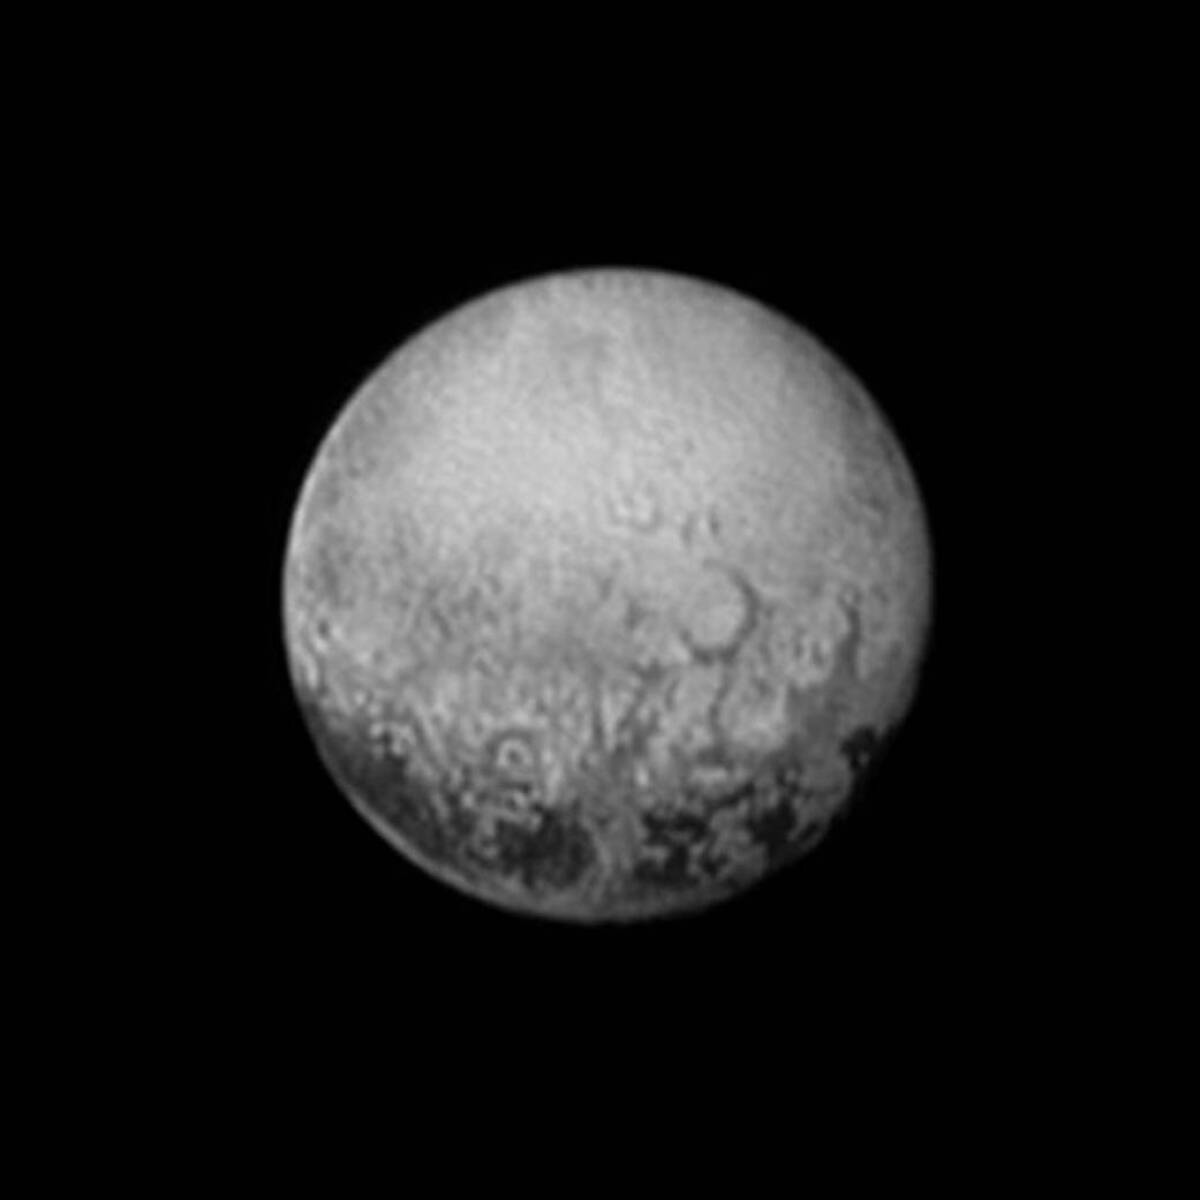 An image taken by the New Horizons spacecraft and released by NASA on Saturday shows Pluto's mysterious dark spots, which are evenly spaced apart and about 300 miles across each.